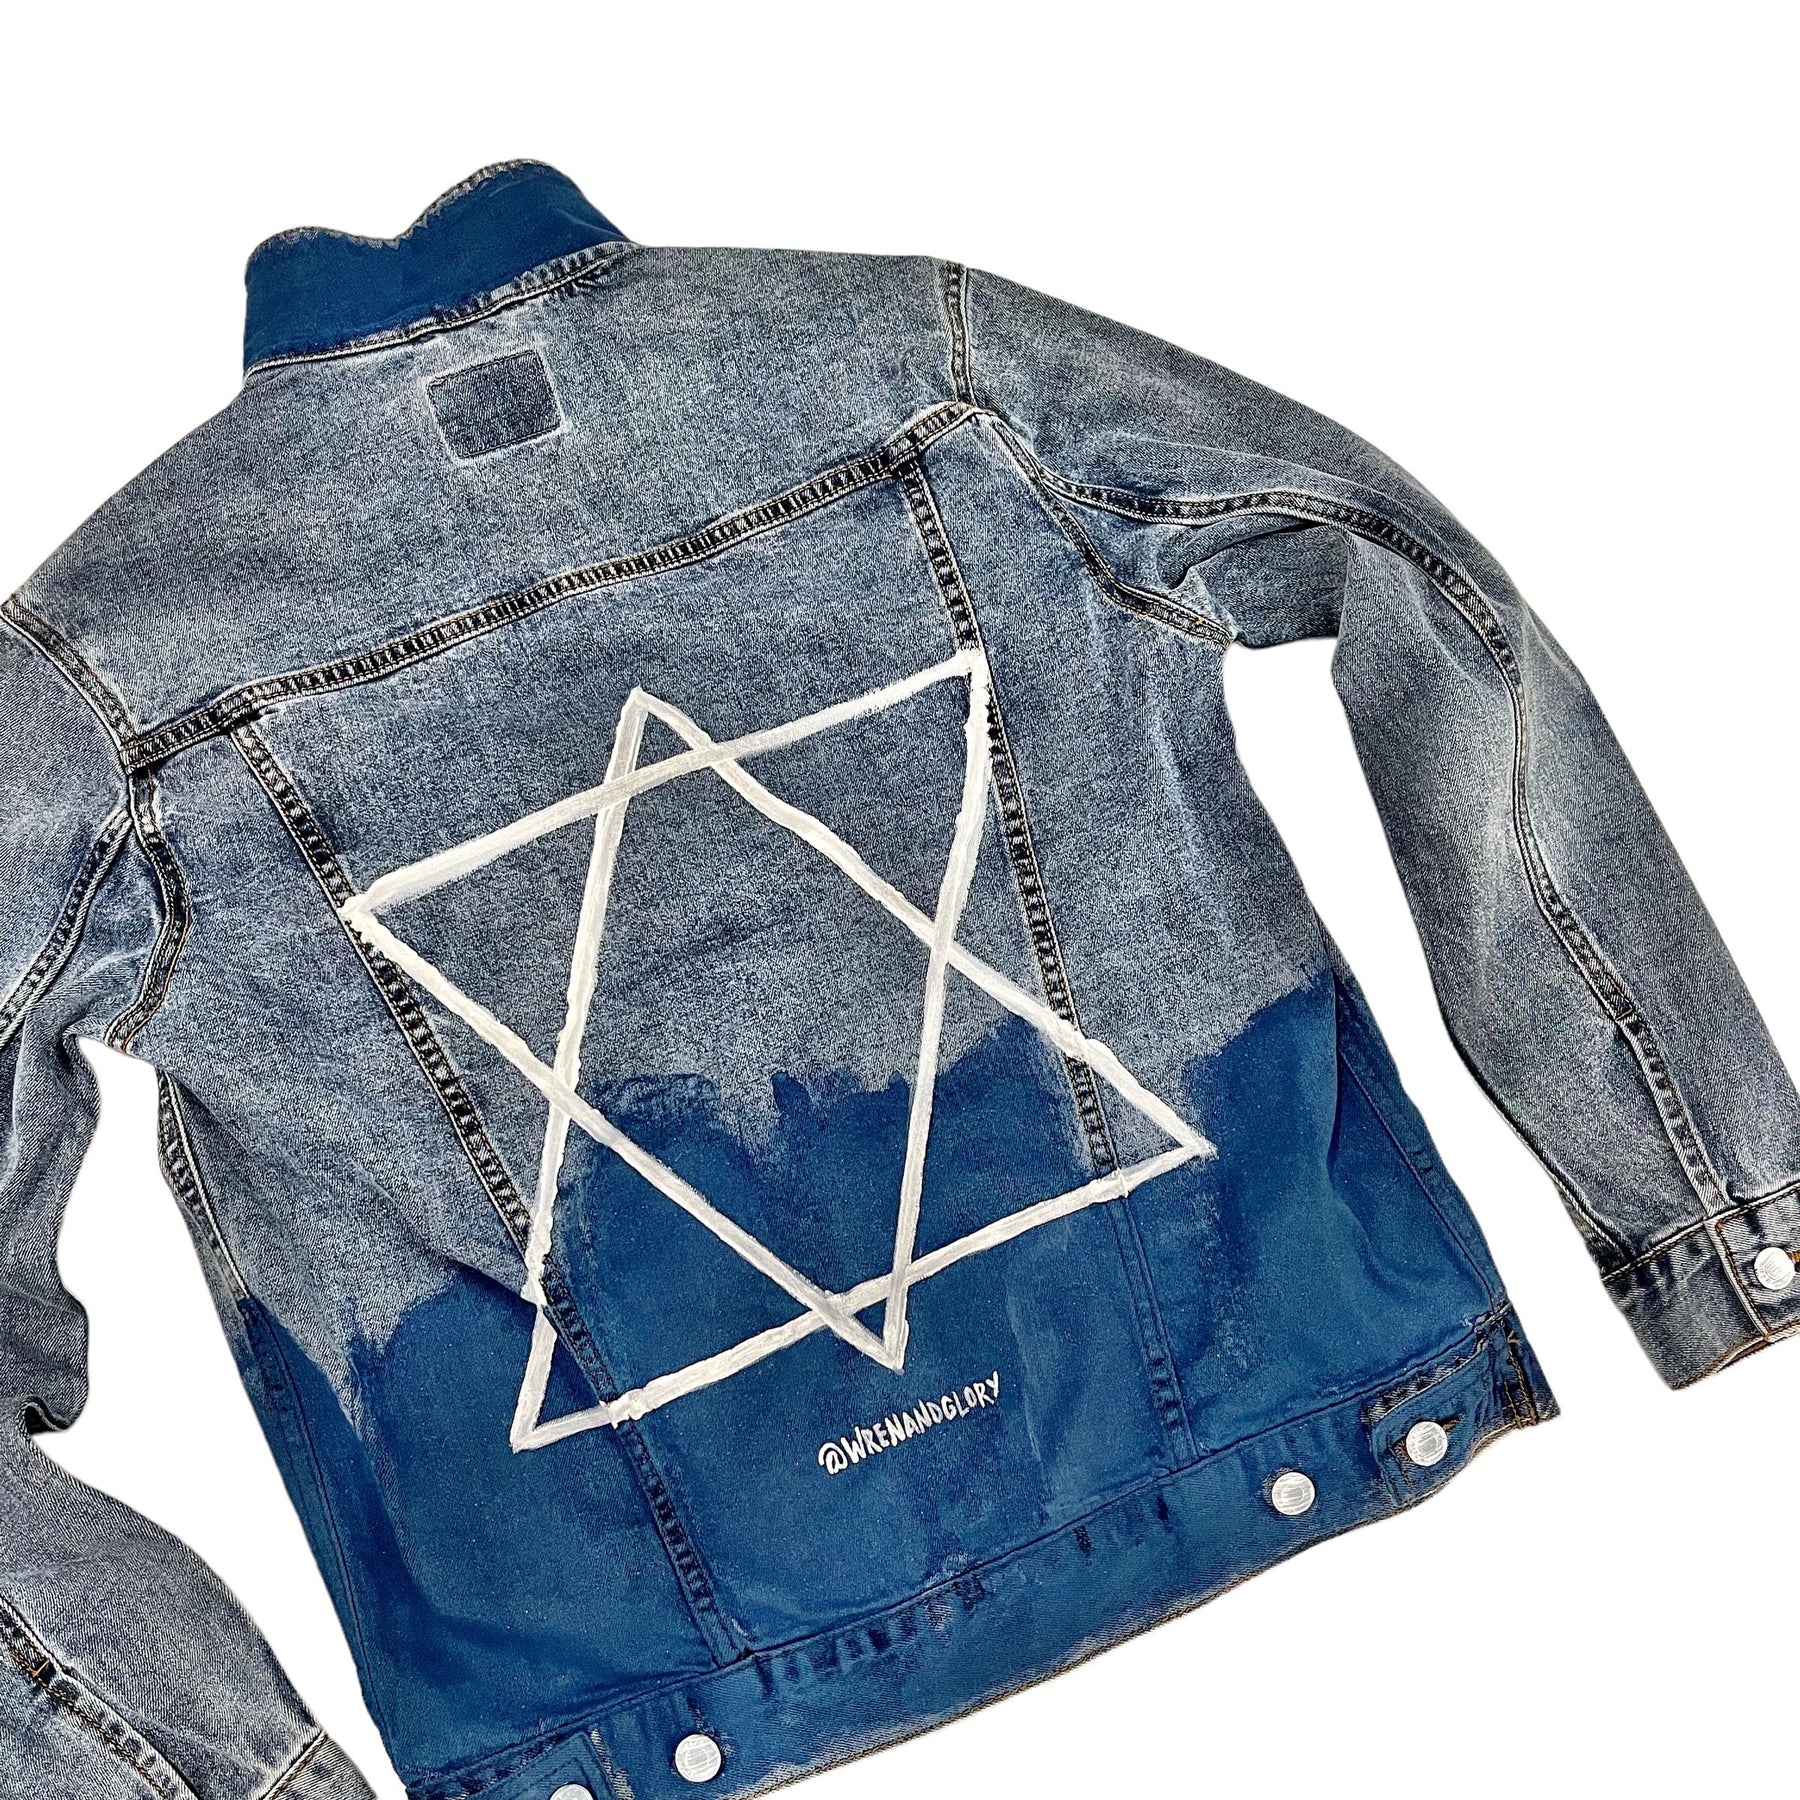 'Stand With Israel' Denim Jacket